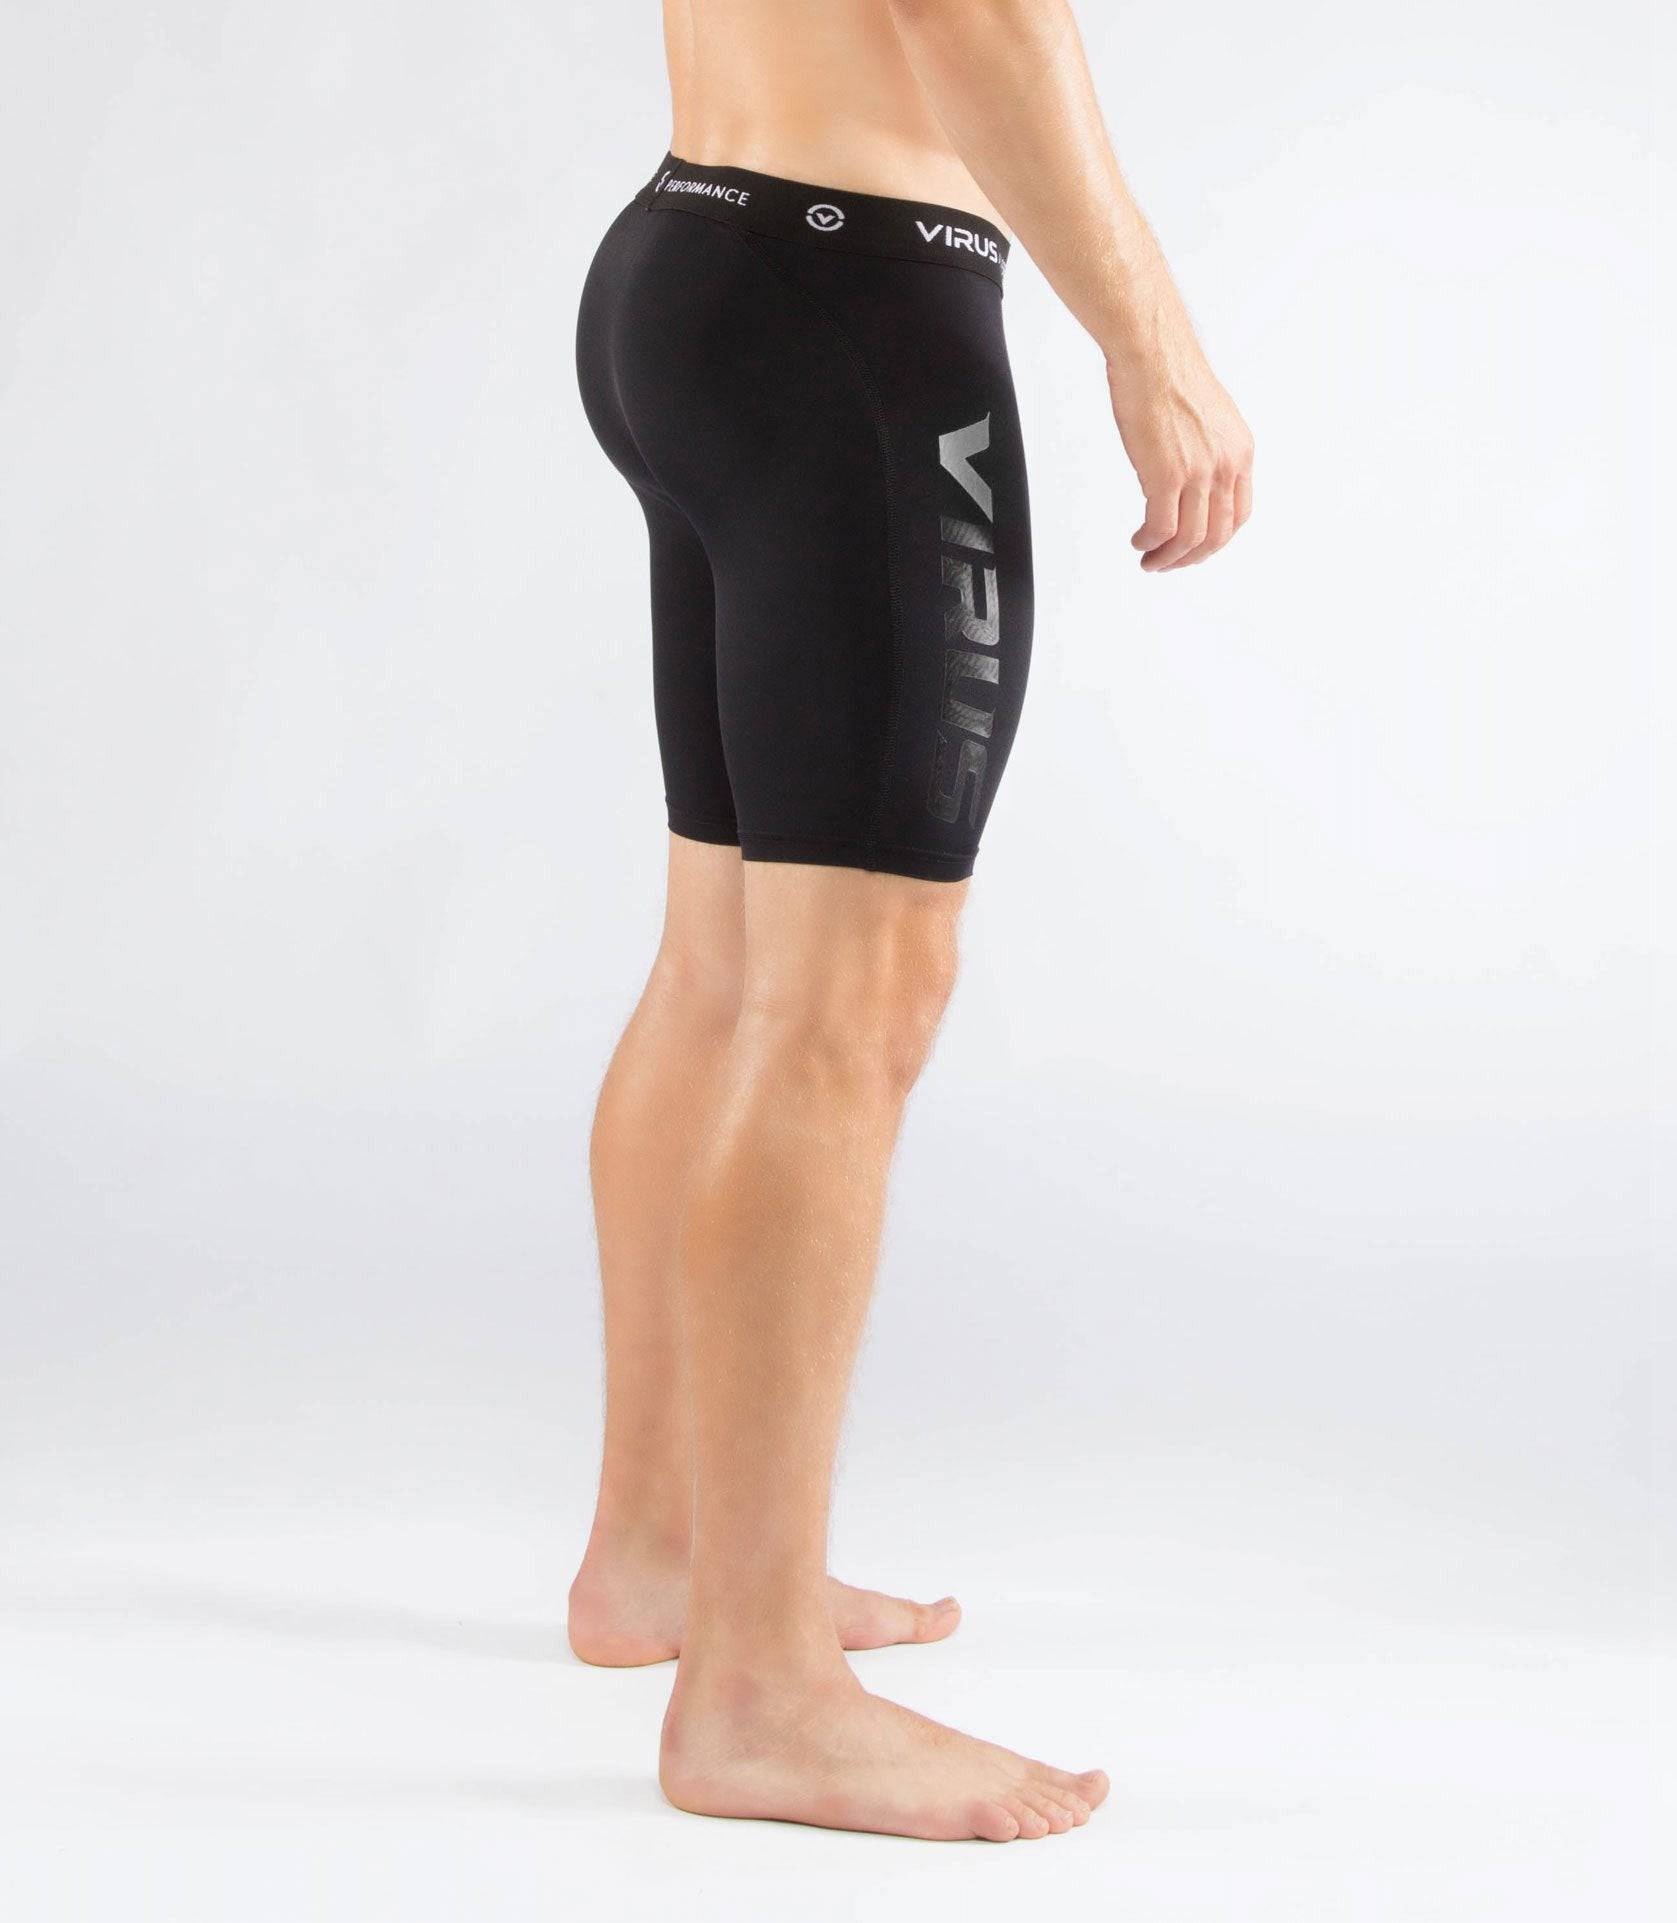 Virus | CO14.5 Stay Cool Compression Shorts - XTC Fitness - Exercise Equipment Superstore - Canada - Shorts